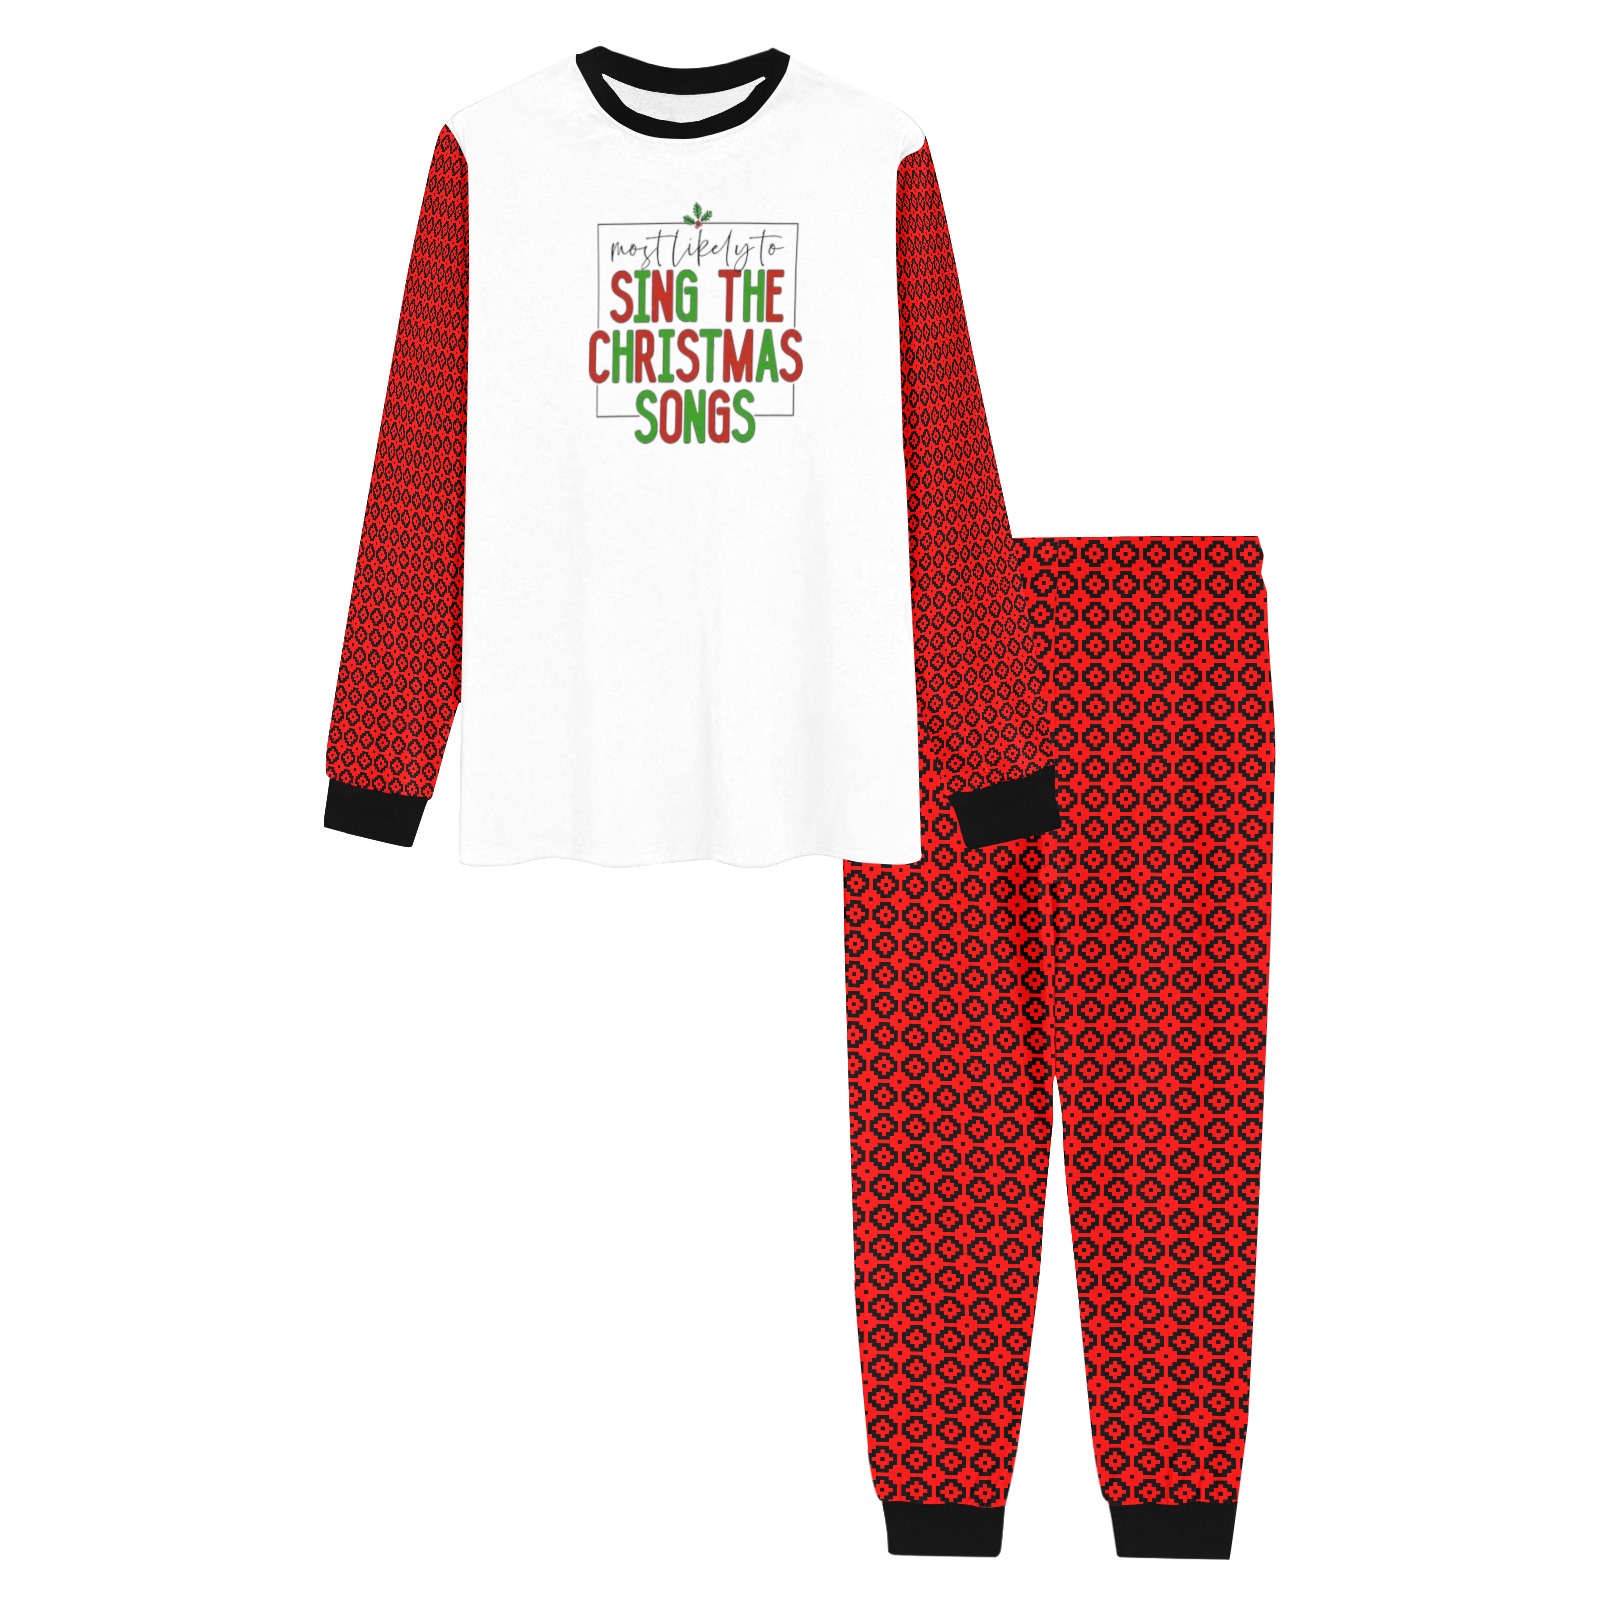 Most Likely to Sing Christmas Songs Men's All Over Print Pajama Set